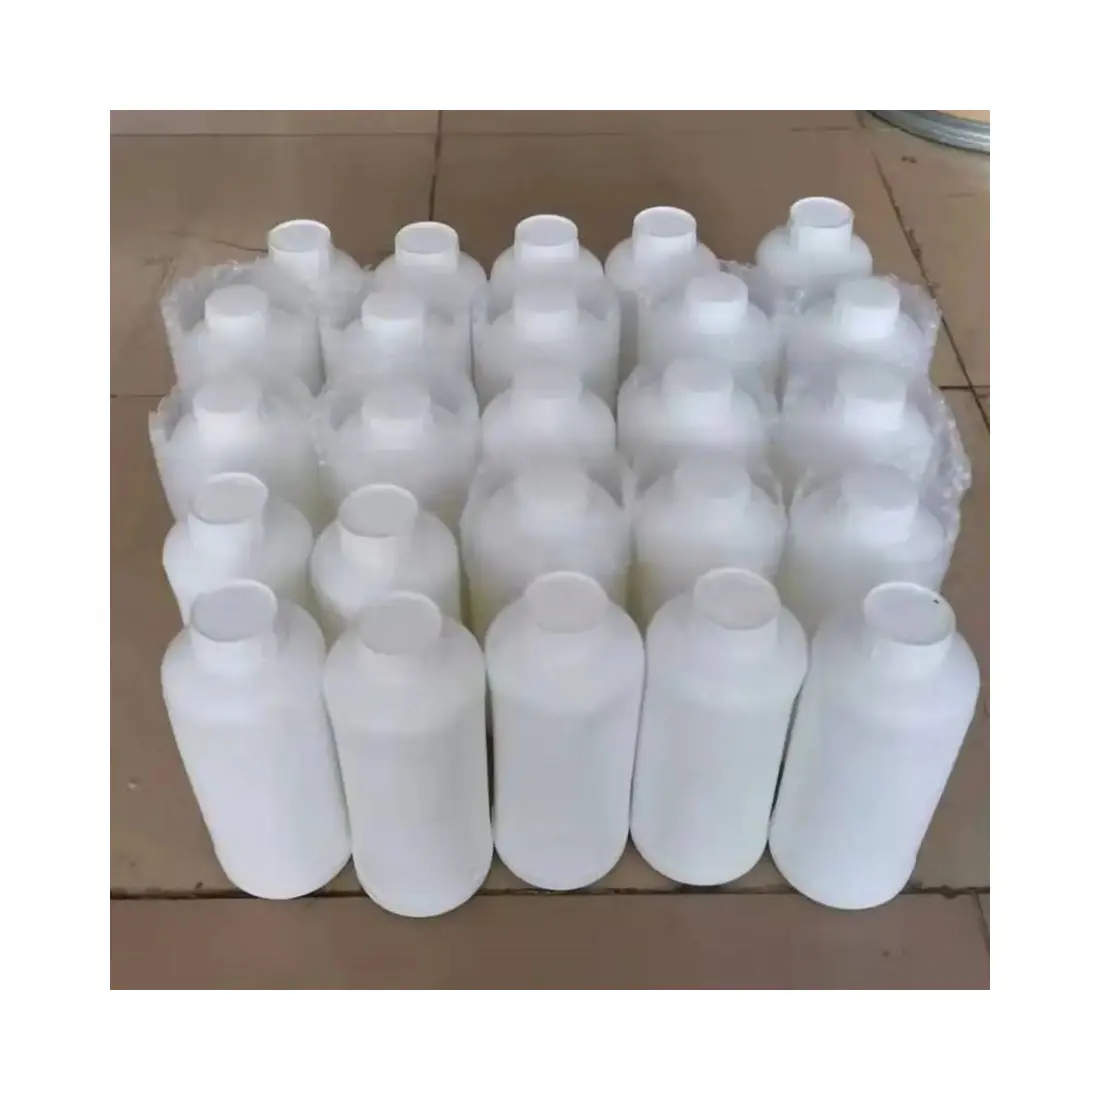 Purity CAS 110-64-5 Liquid 1 4-Butendiol Clear Liquid Sydney Melbourne Warehouse Stock 3 Days Fast Delivery 99.7%